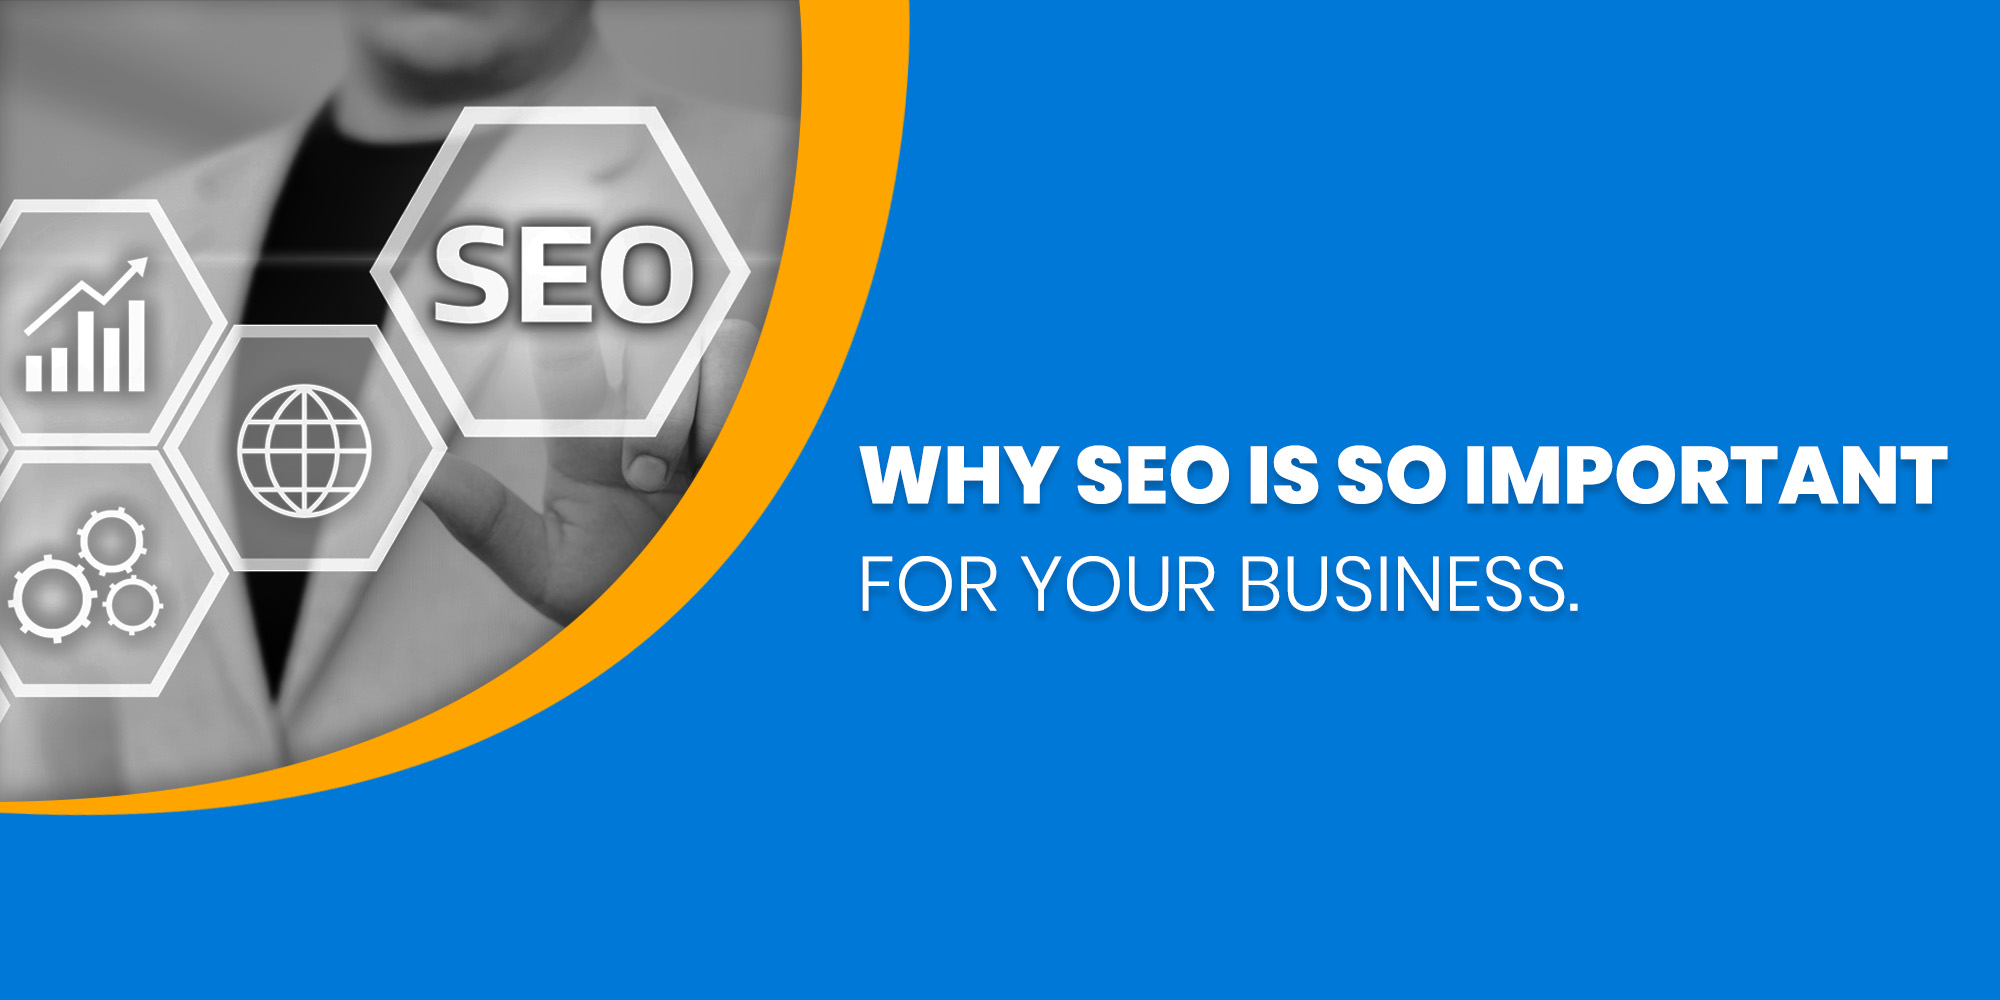 Why SEO is so important for your business